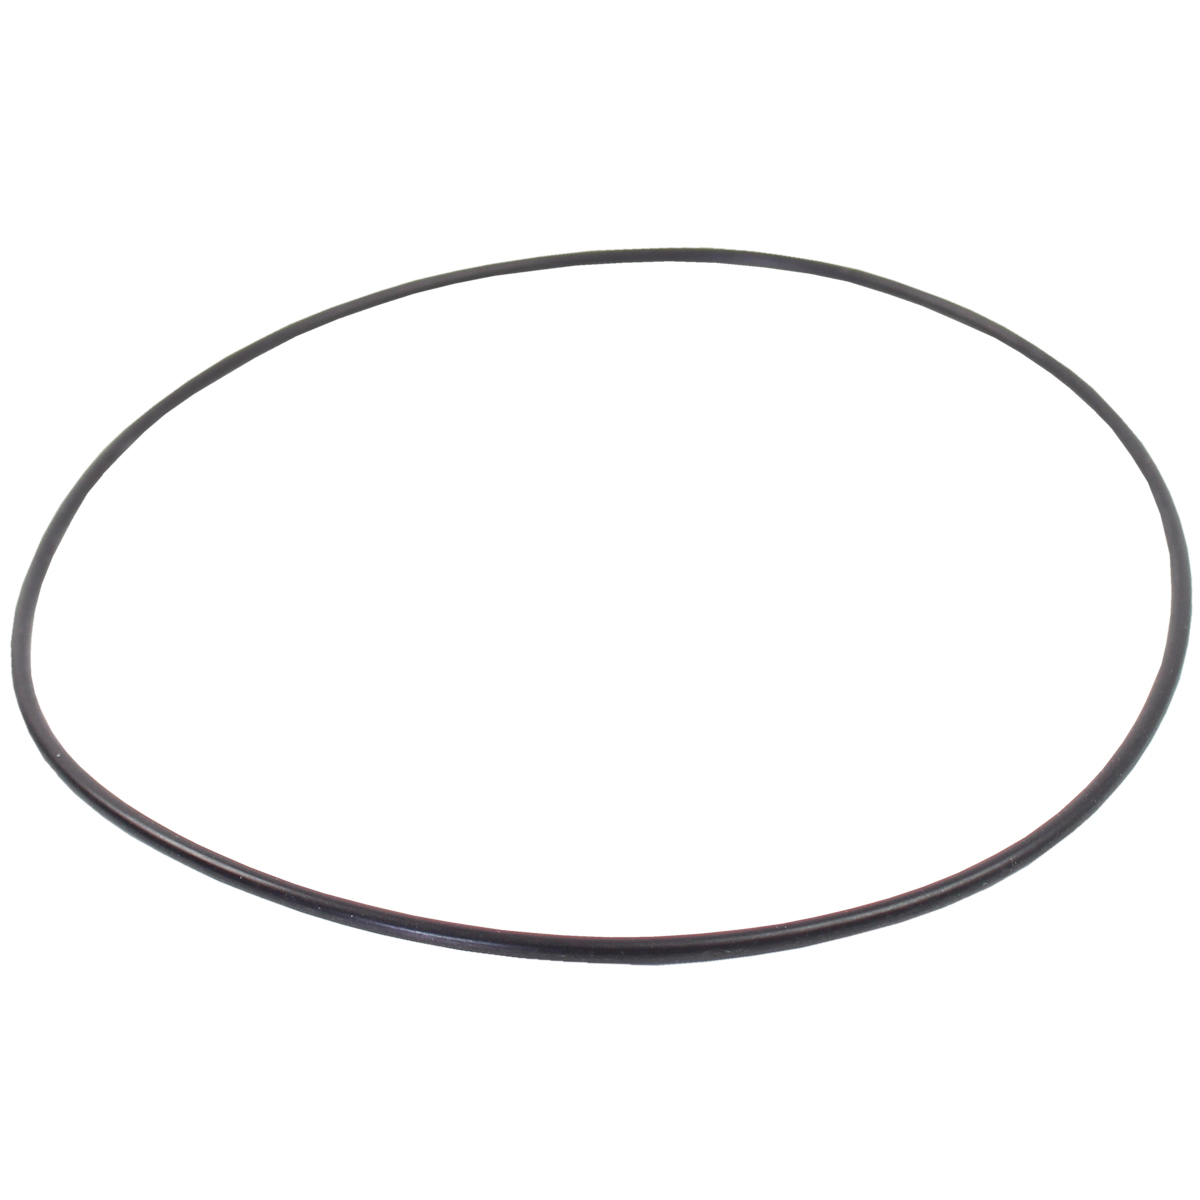 O-ring seal 210 x 3 mm (8.3 x 0.1 in.)
